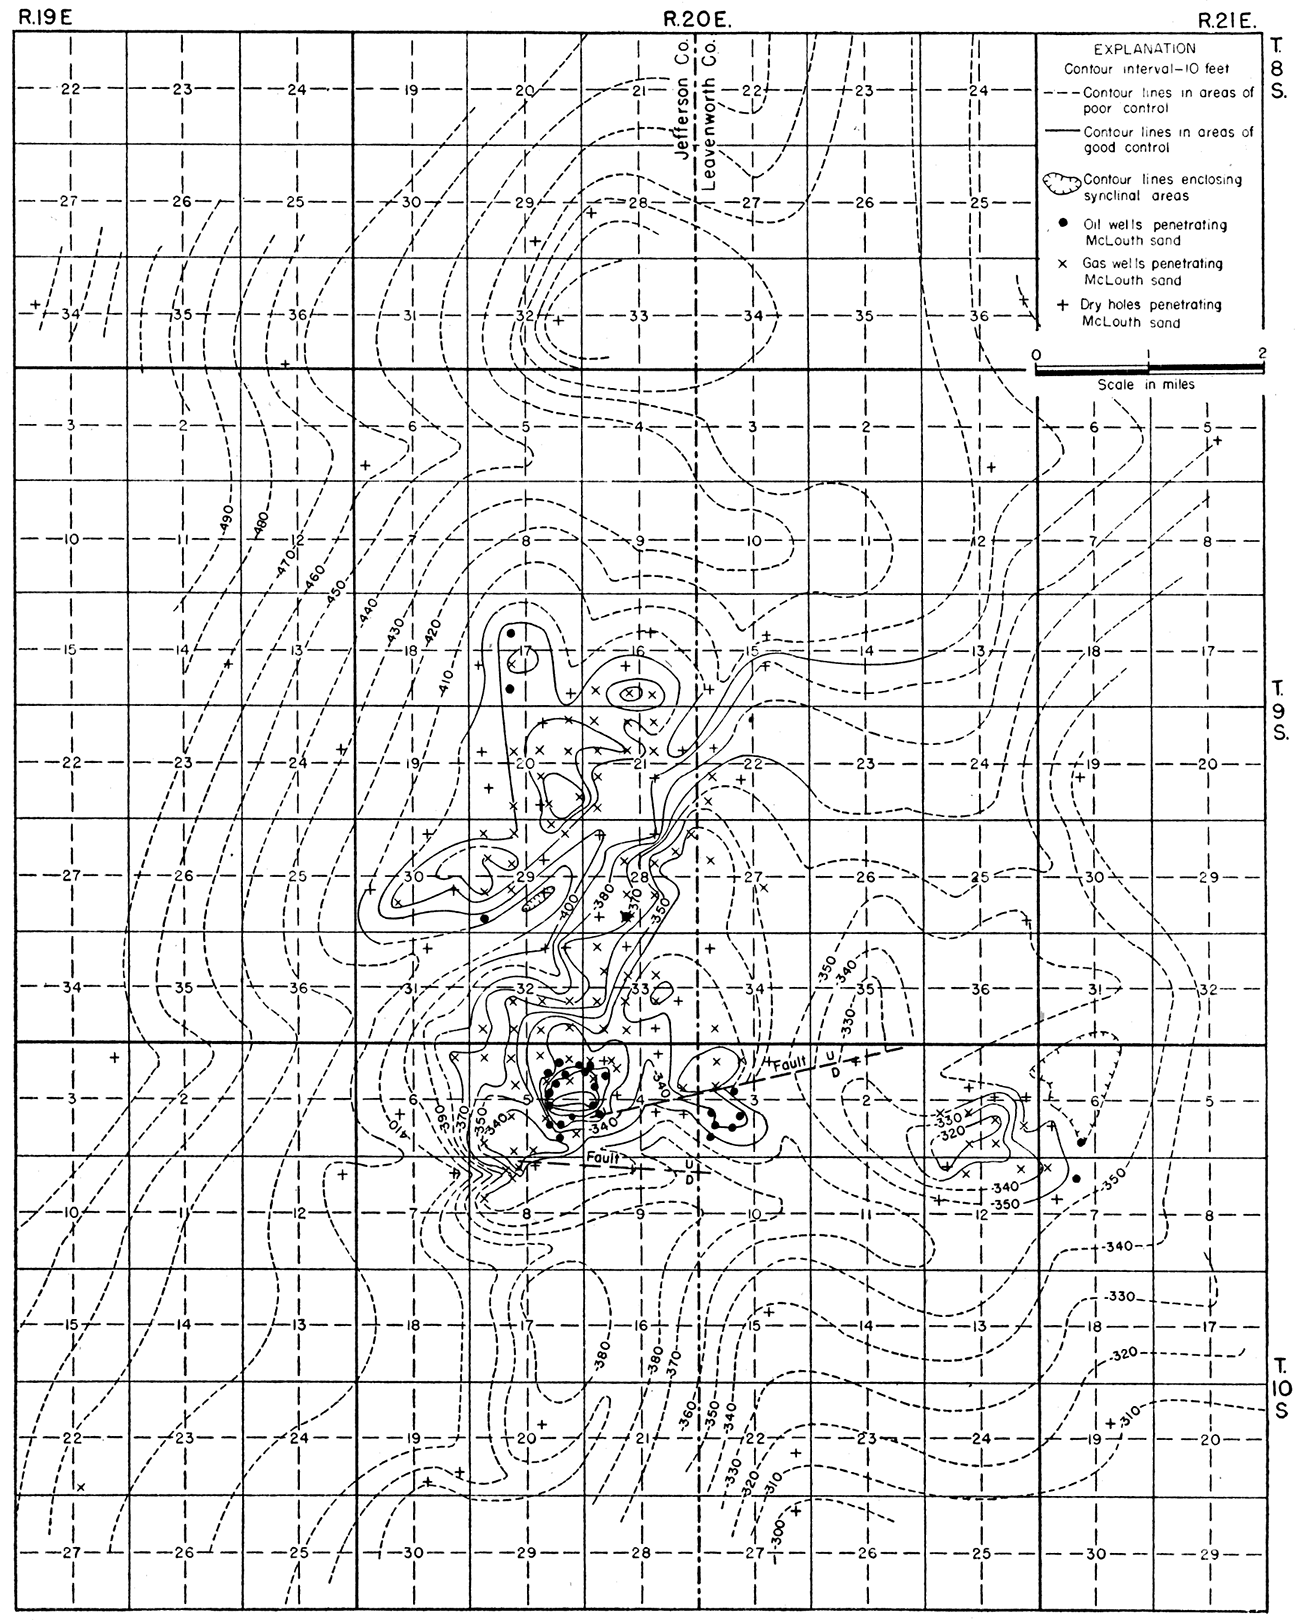 Map showing the structure of the McLouth field contoured on the top of the McLouth sand.